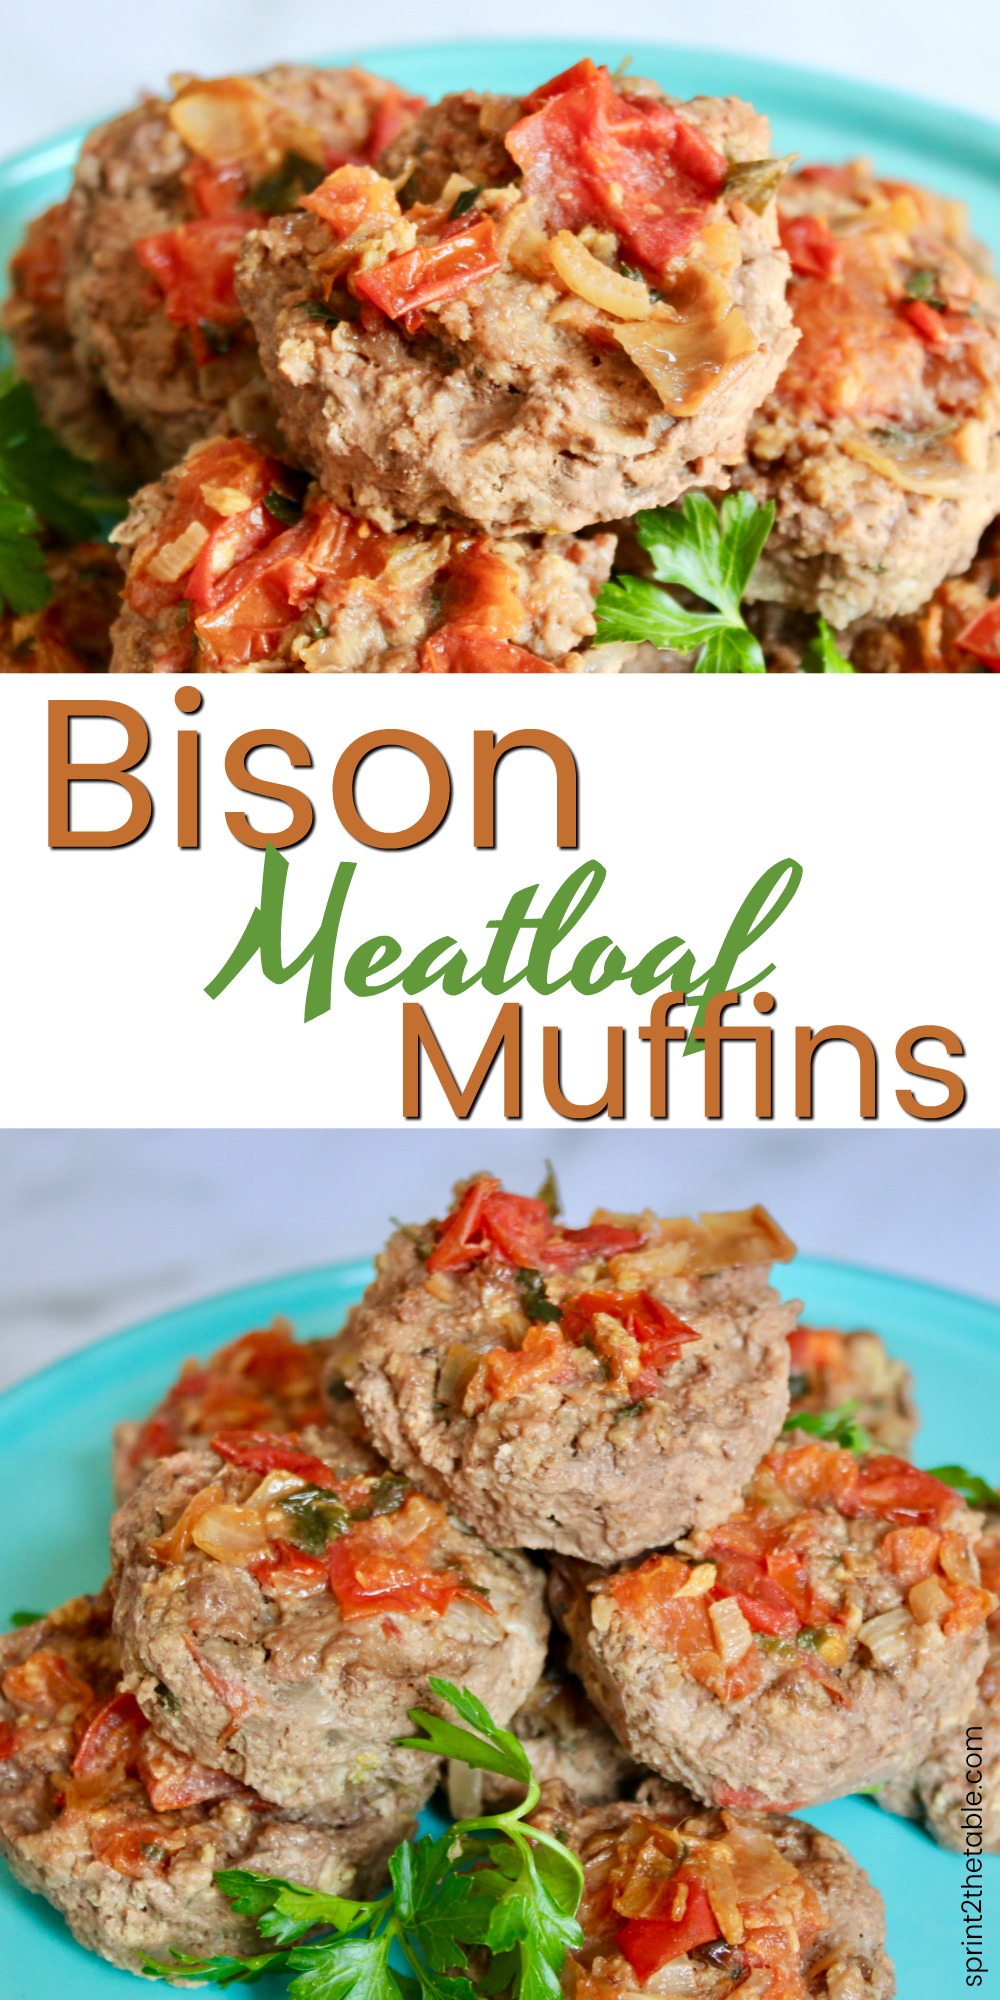 Bison Meatloaf Muffins are great for a weeknight dinner or make-ahead lunches.  The servings are individually portioned in a muffin tin, making this meatloaf recipe even easier to serve.